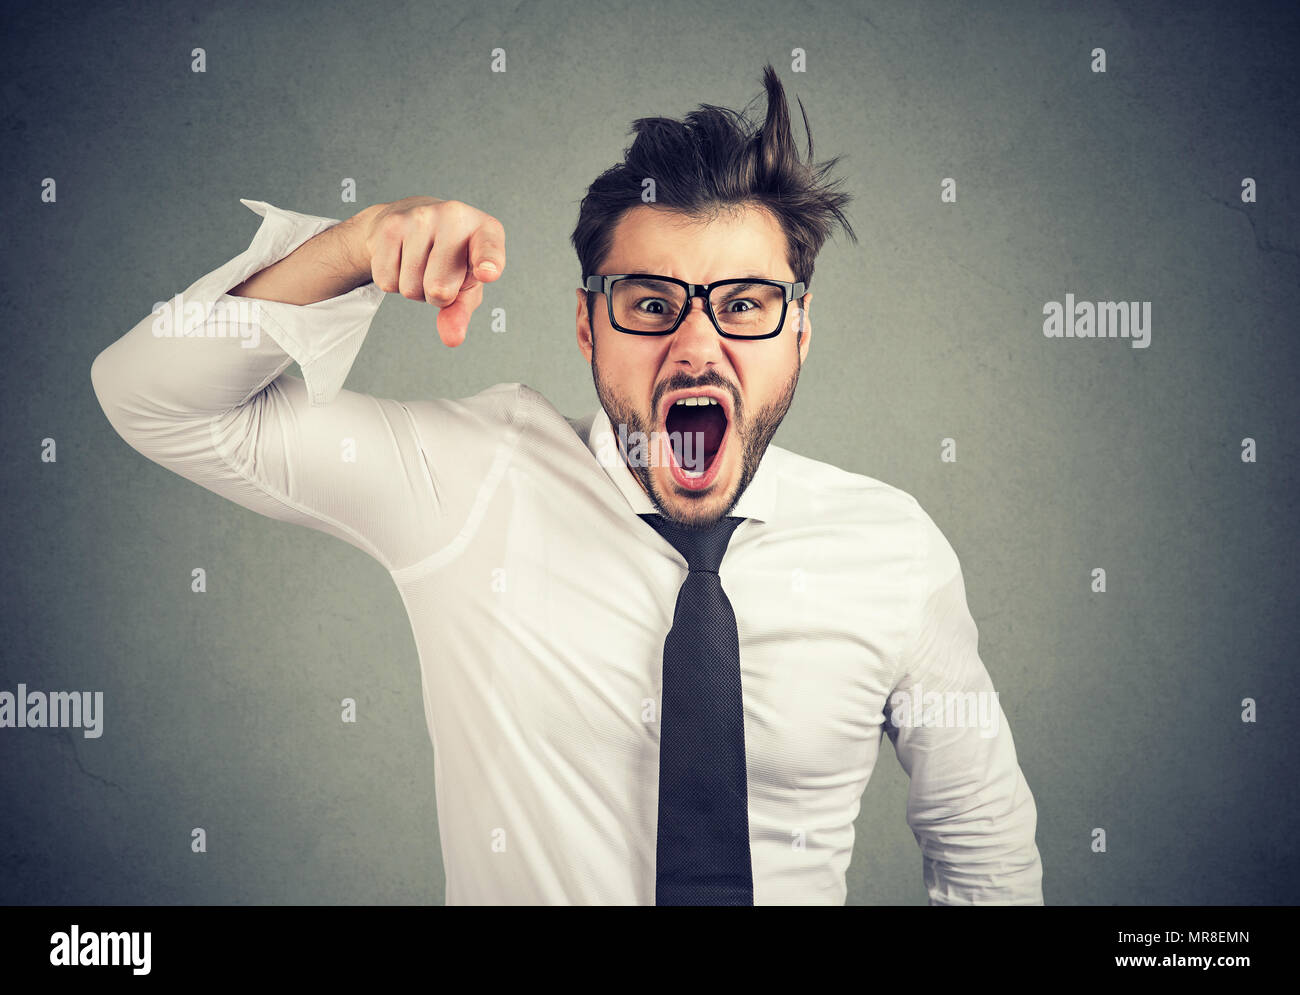 Angry young mad business man accusing someone screaming Stock Photo